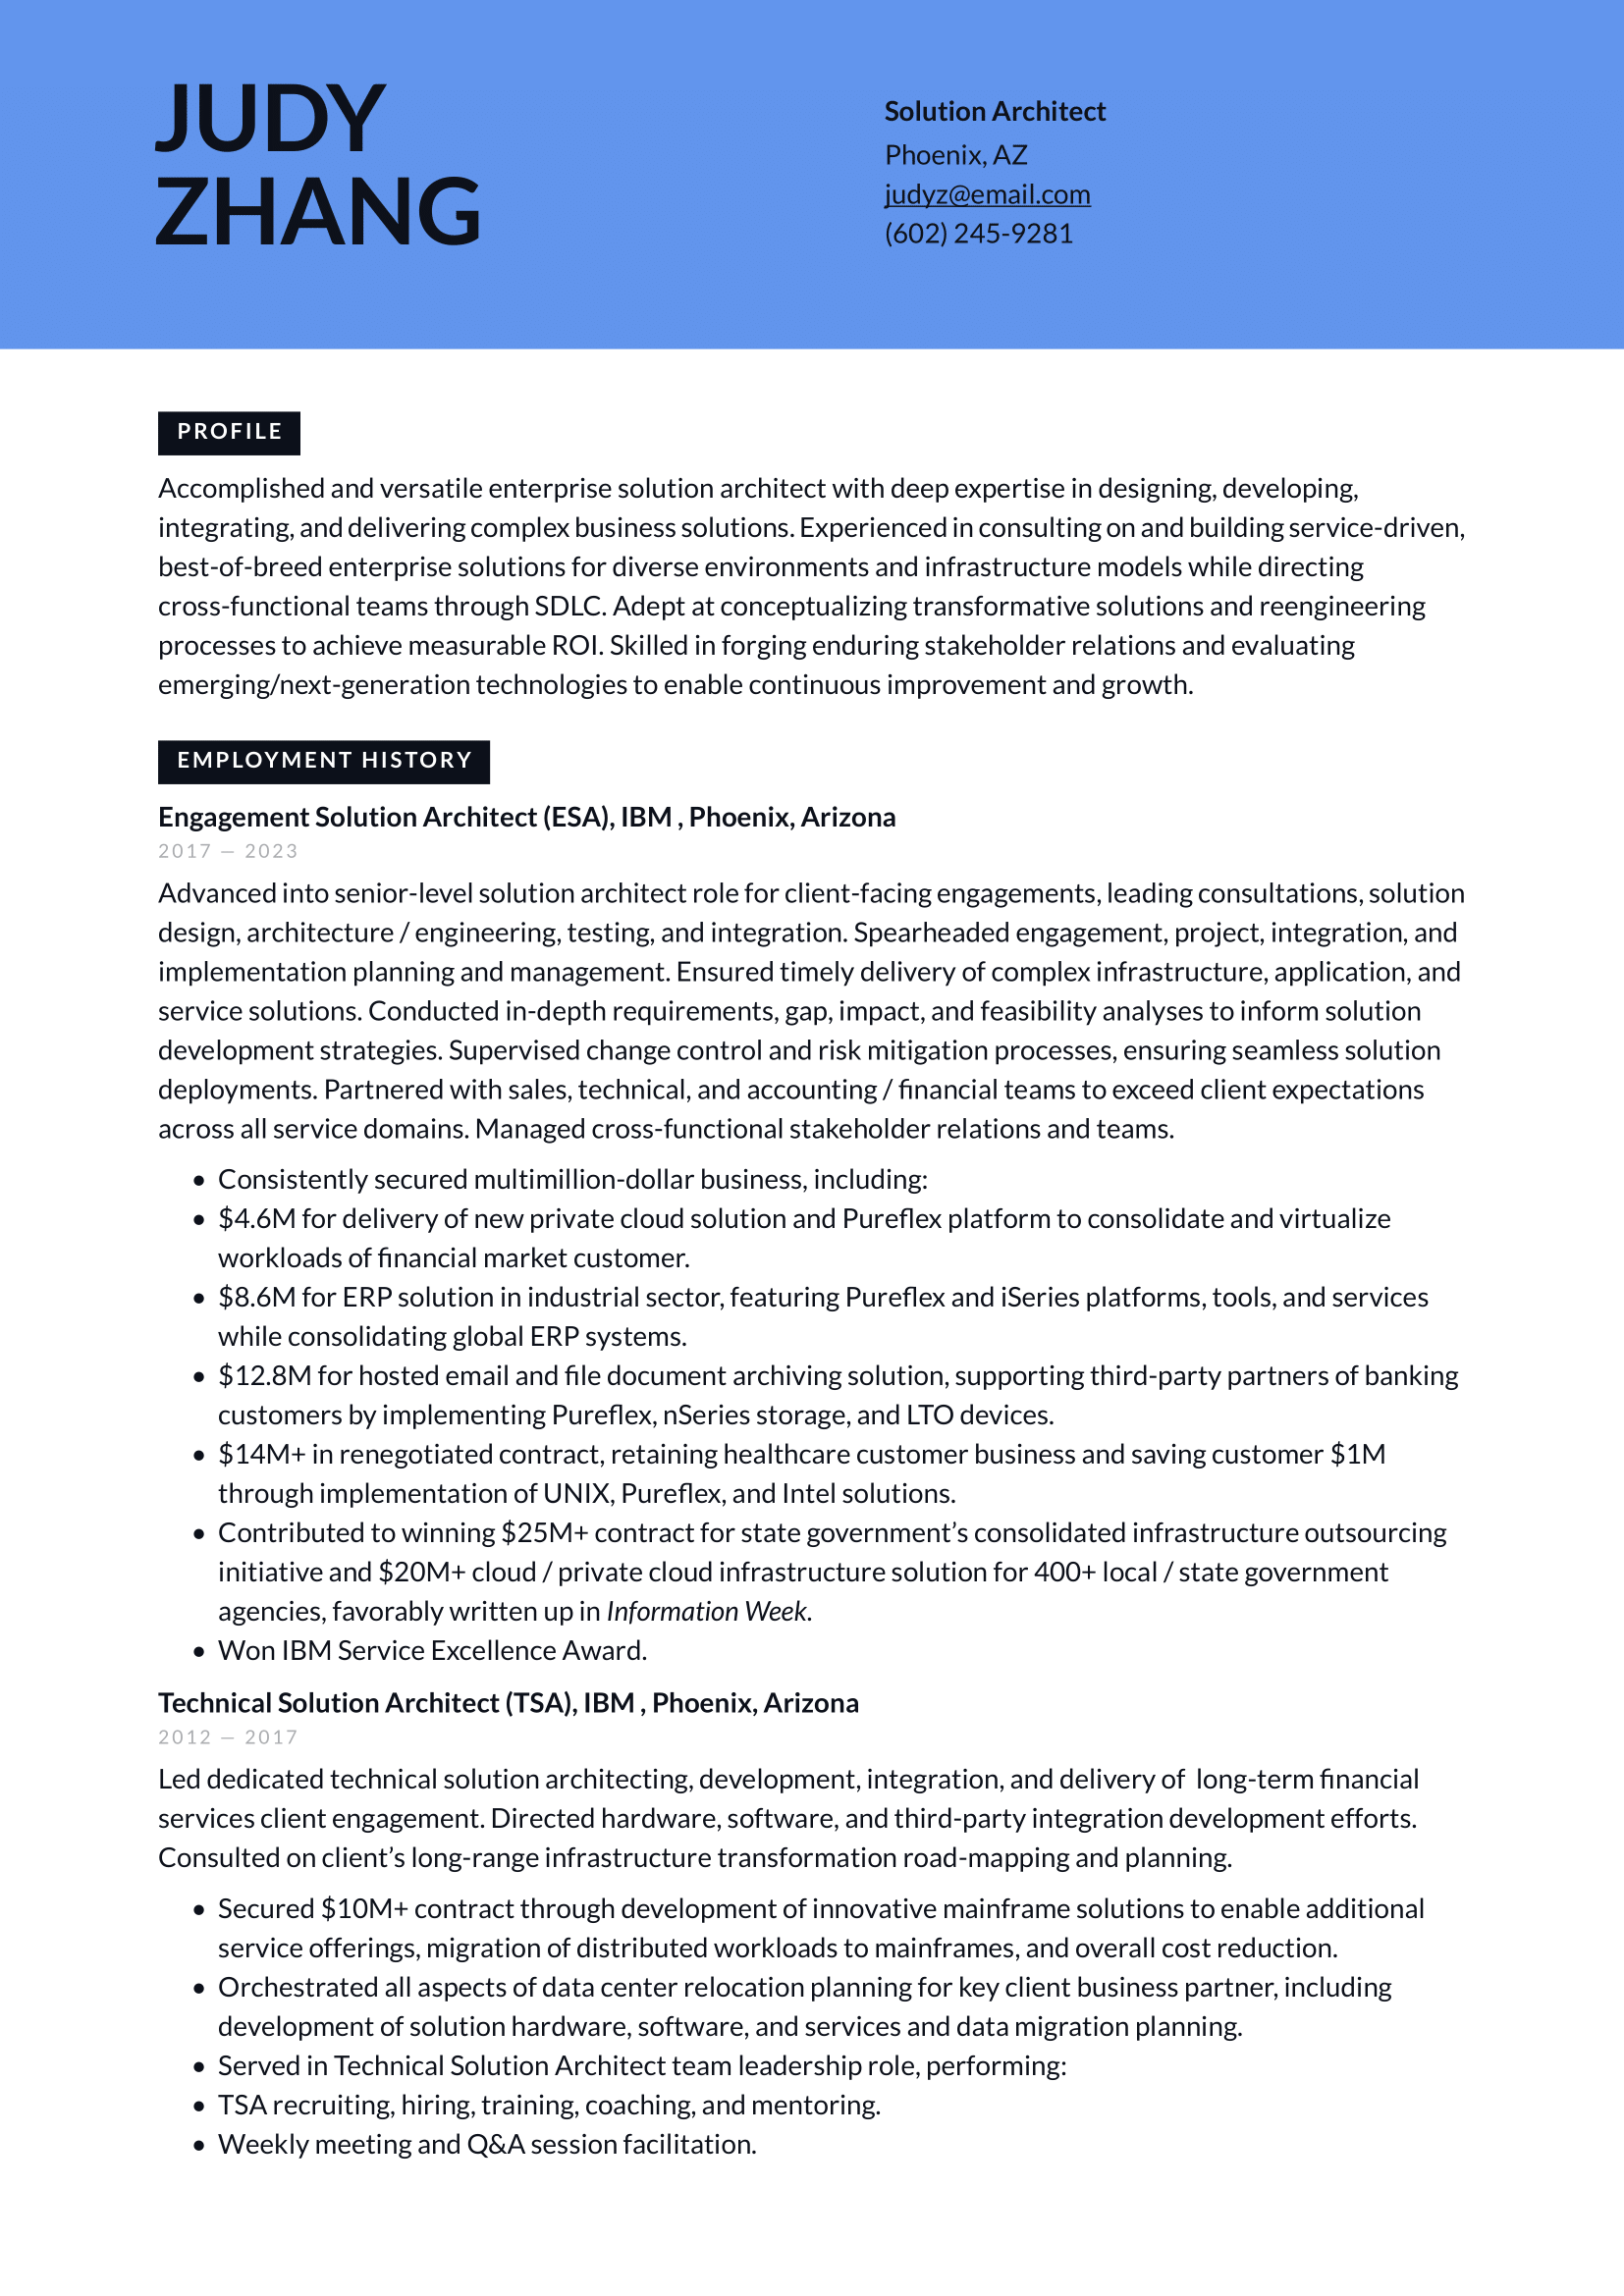 Solution_Architect-Resume-Example.png